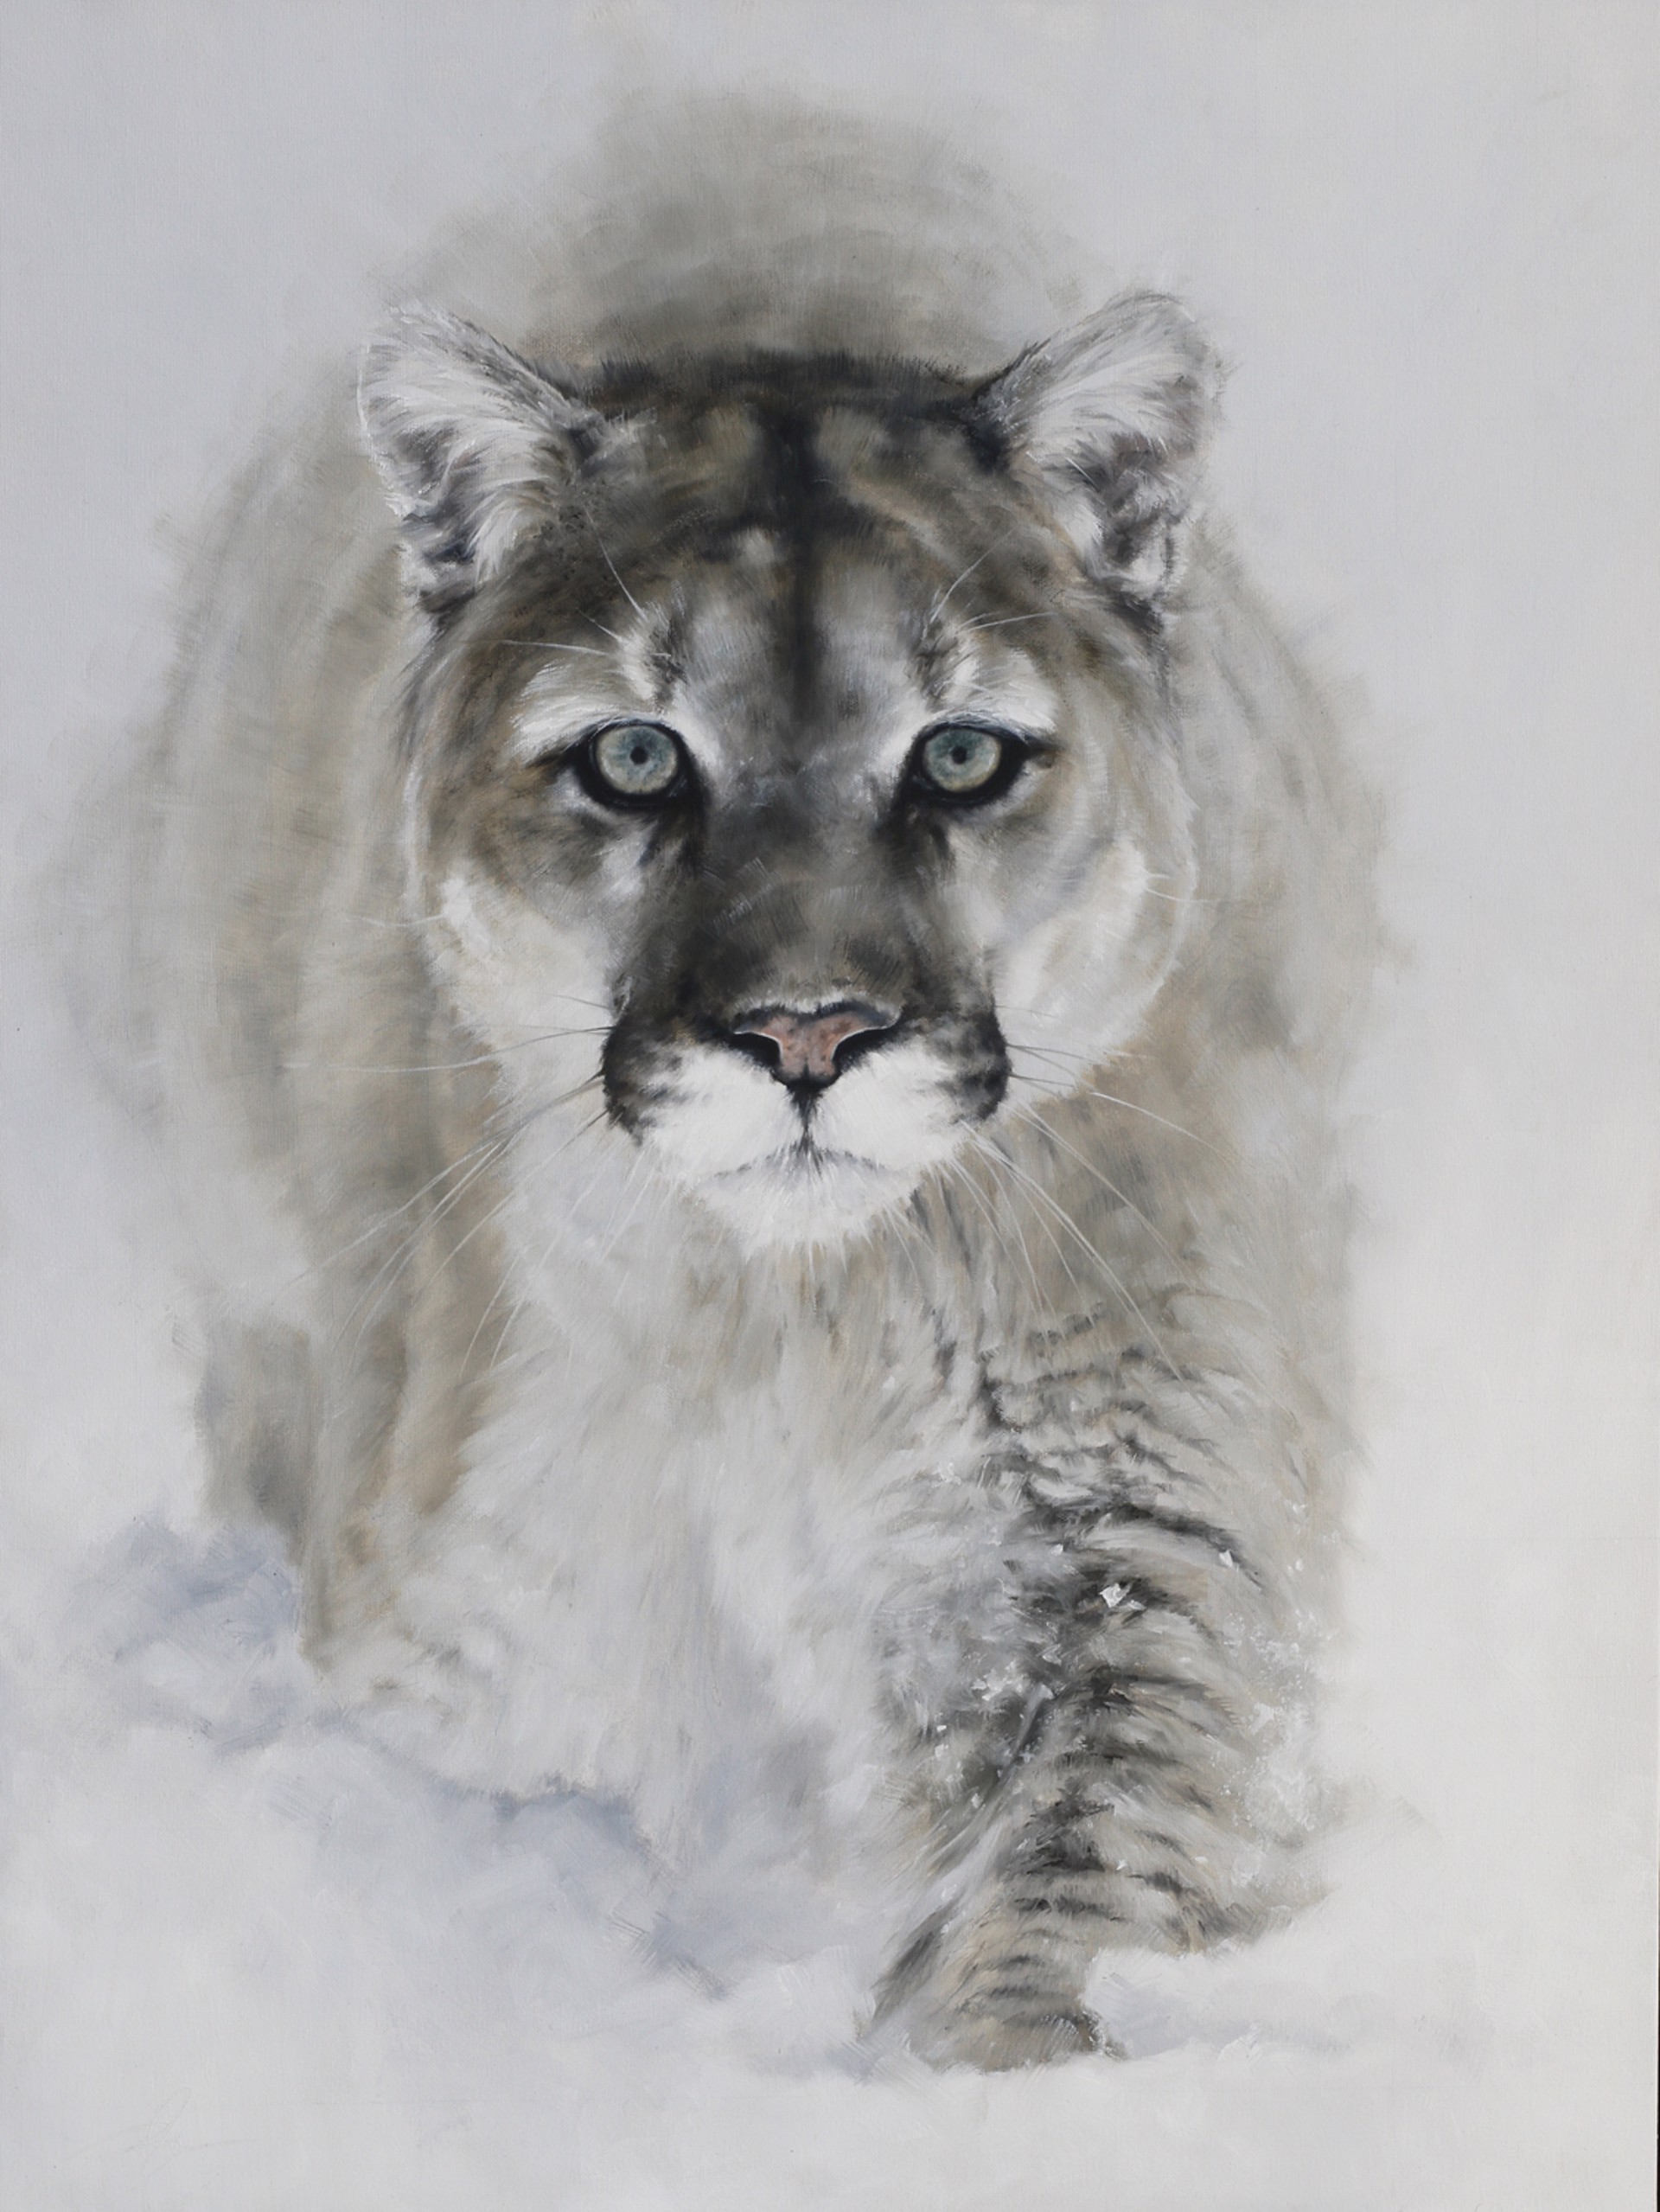 Original Contemporary Oil Painting Of A Cougar Walking Towards The Viewer In Black And White, By Doyle Hostetler